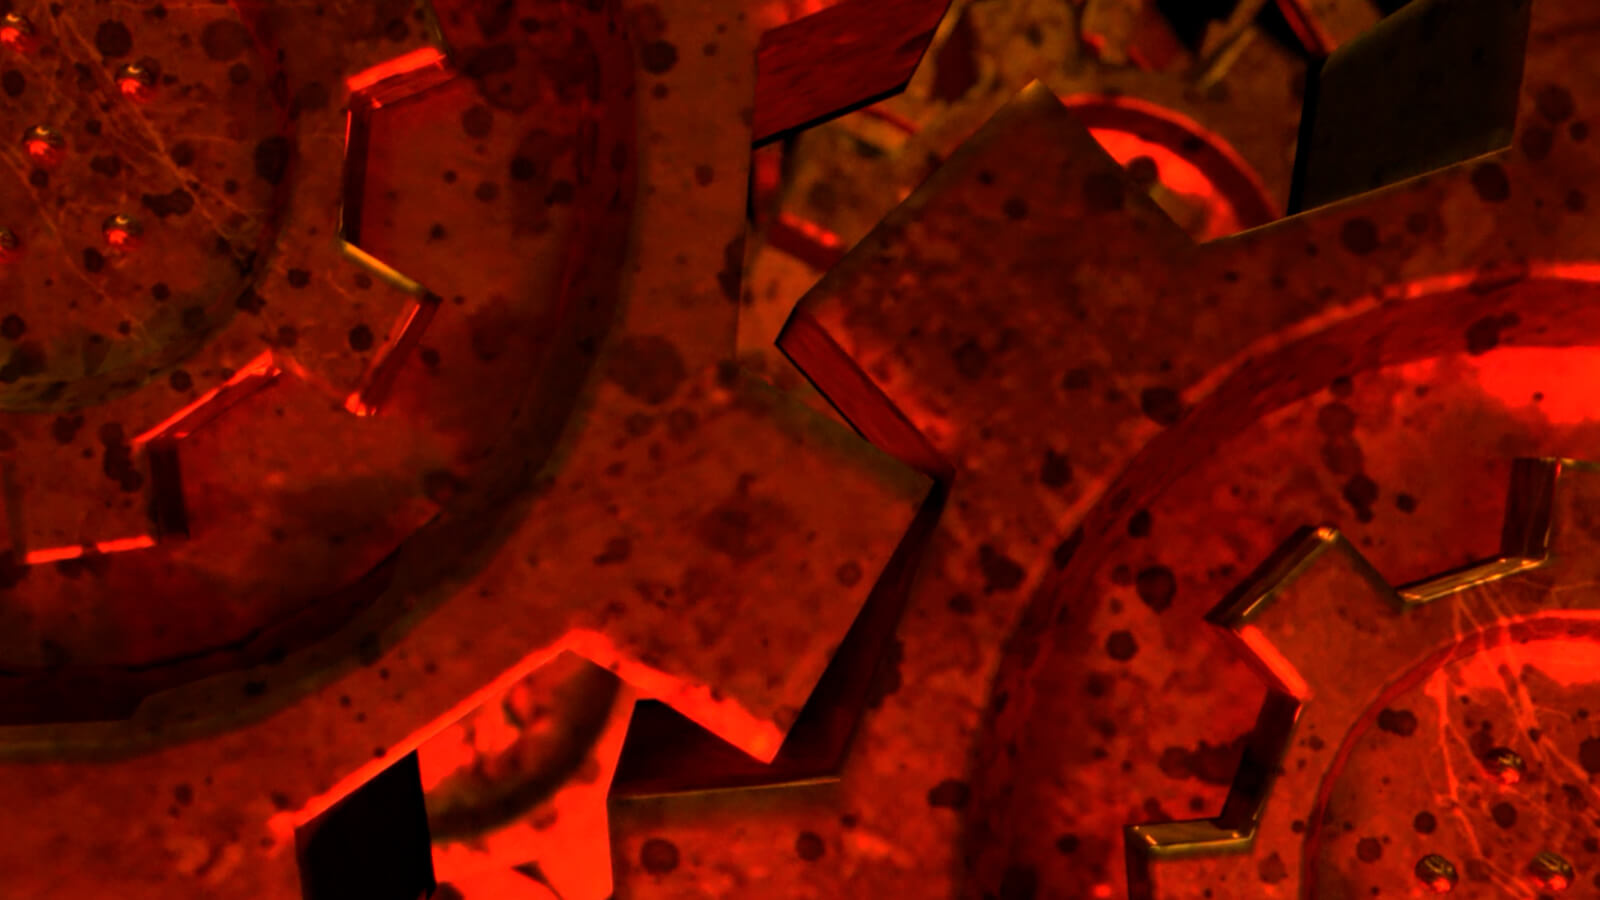 An extreme closeup of red-lit metal cogs with grease spots